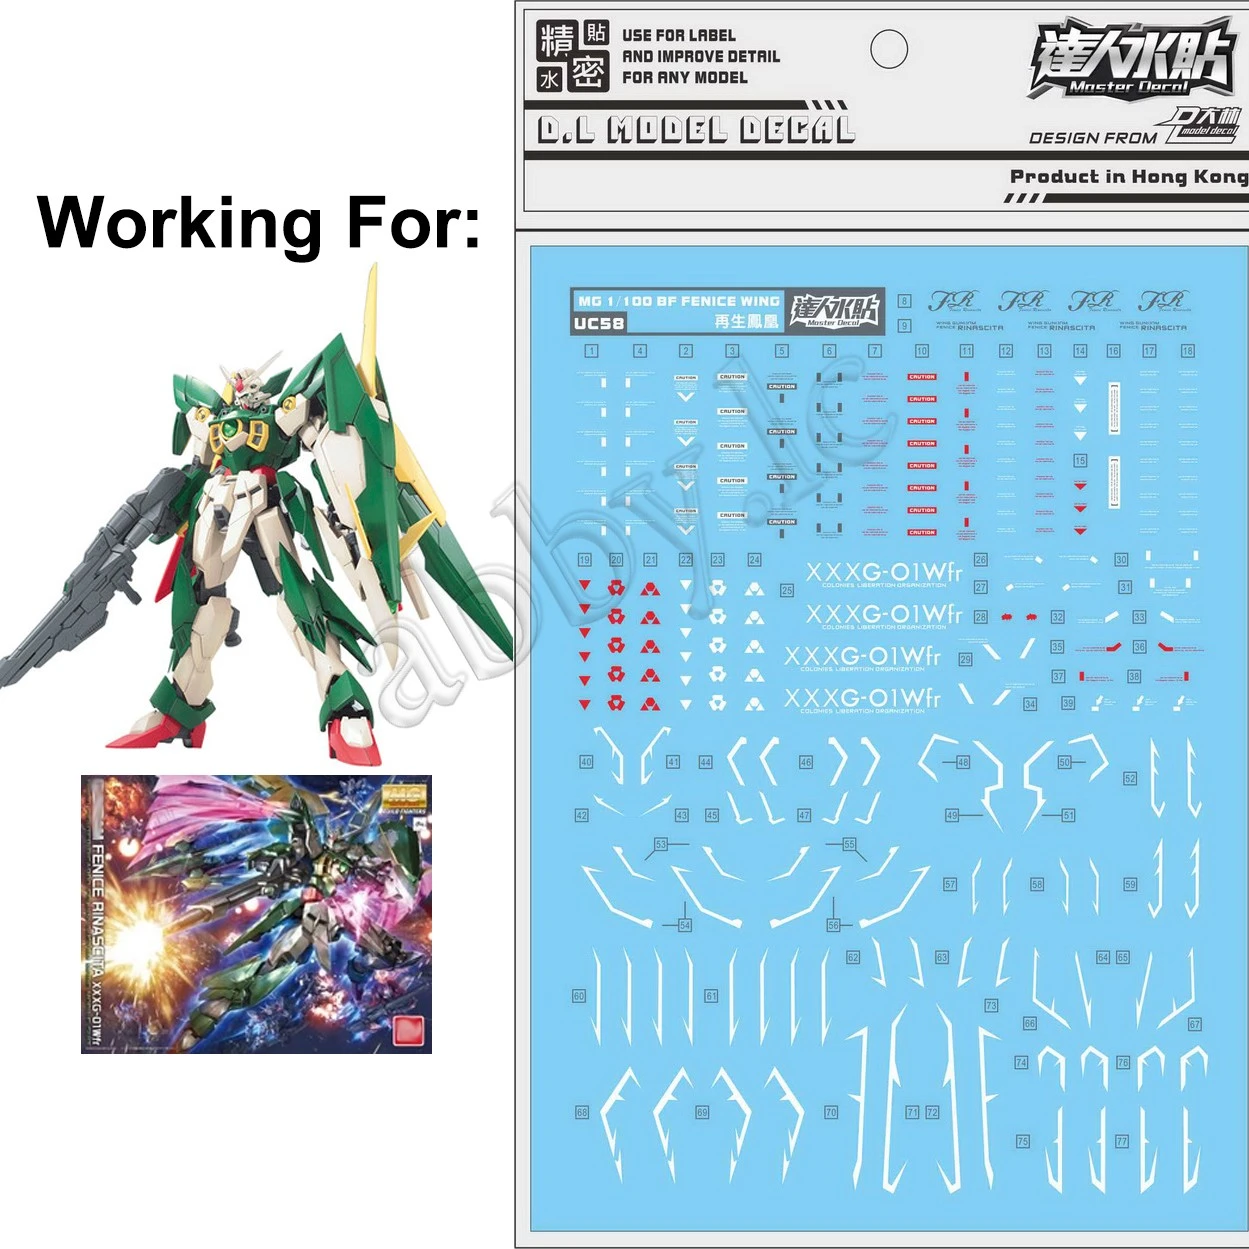 for MG 1/100 XXXG-01Wfr Fenice Rinascita D.L Model Master Water Slide pre-Cut Detail Decal up Sticker BF Build Fighter UC58 DL model building kits